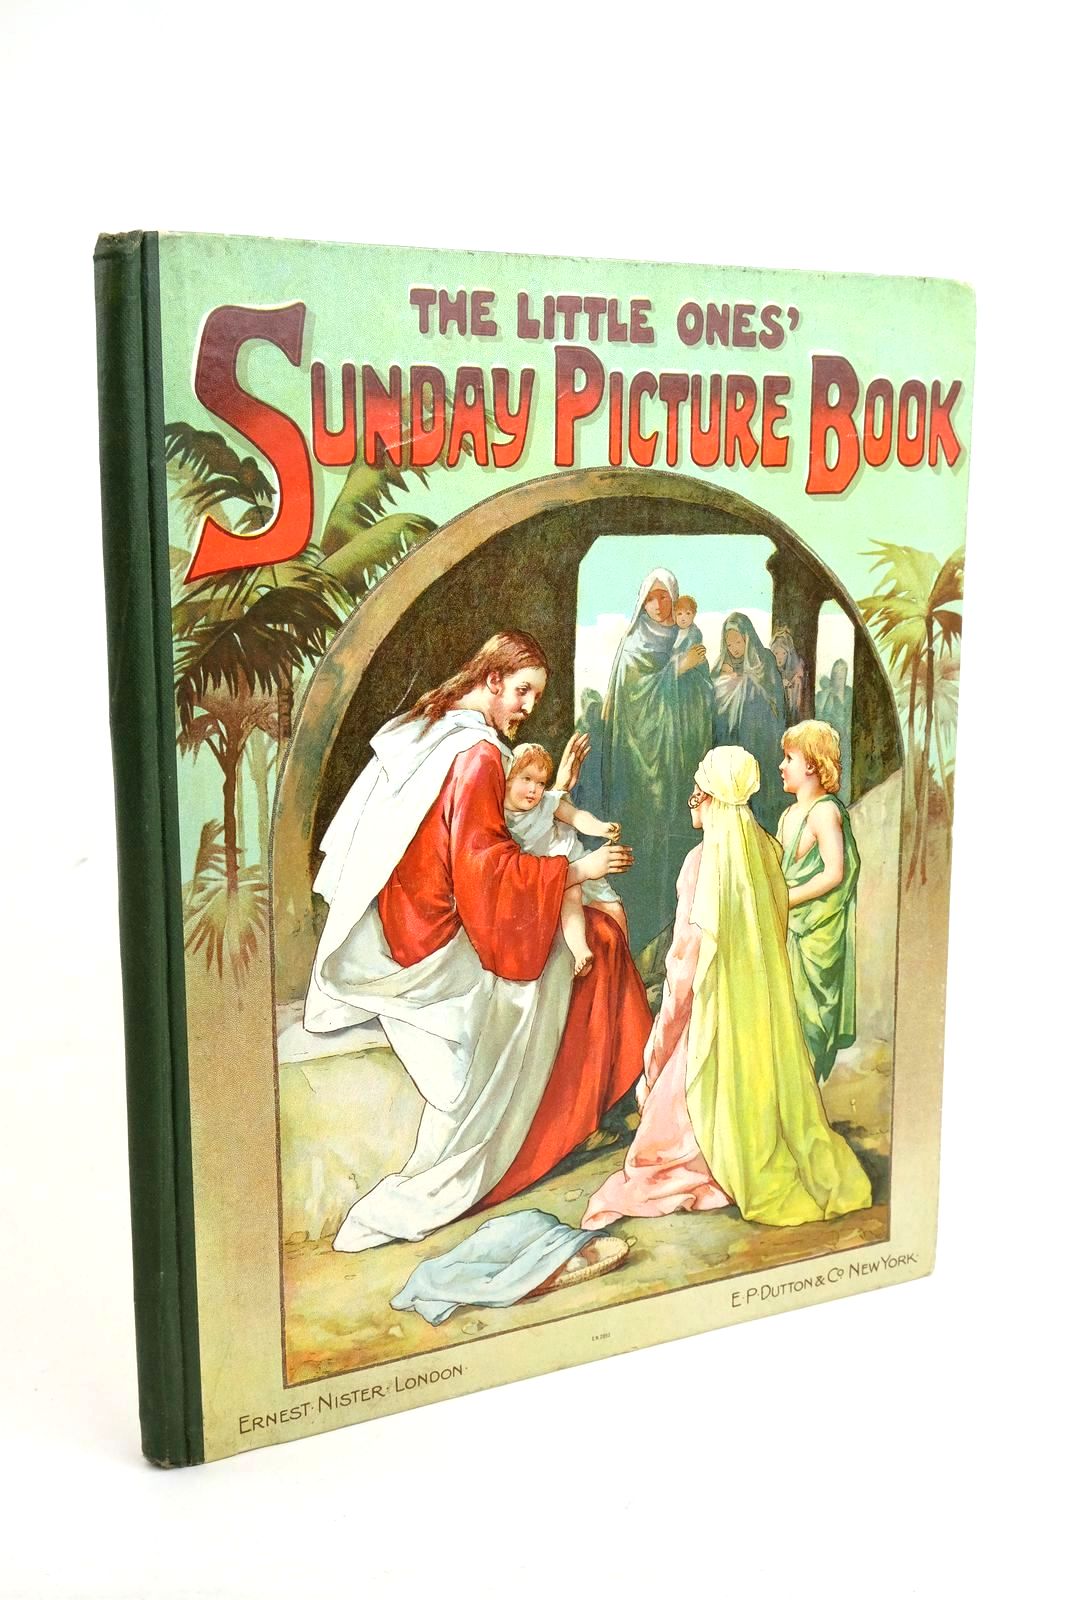 Photo of THE LITTLE ONES' SUNDAY PICTURE BOOK published by Ernest Nister (STOCK CODE: 1322238)  for sale by Stella & Rose's Books